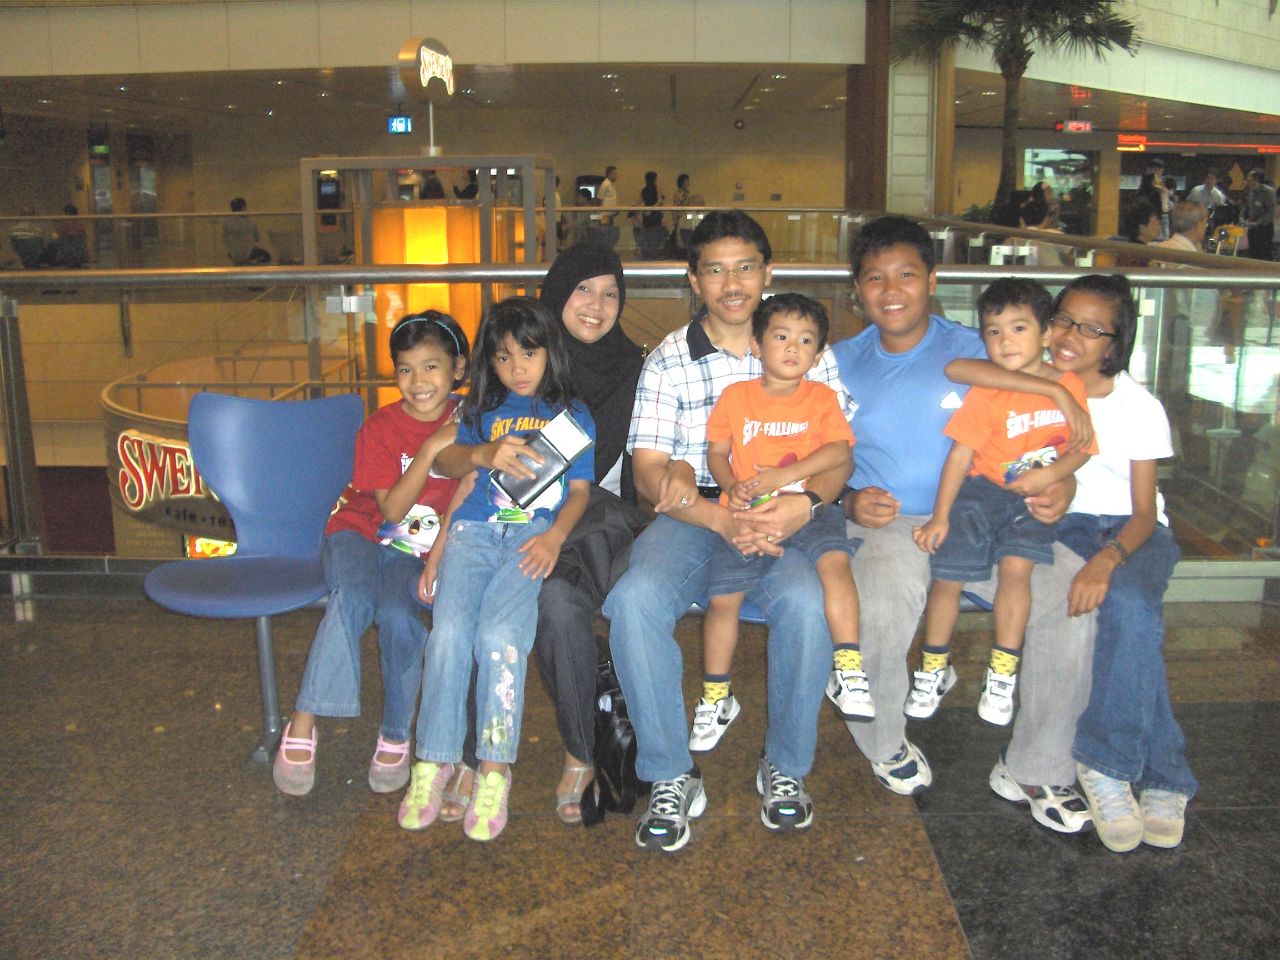 Arifalina (in red on the extreme left) with her family at Changi Airport Terminal 2. Weekends and birthday meal celebrations were also he